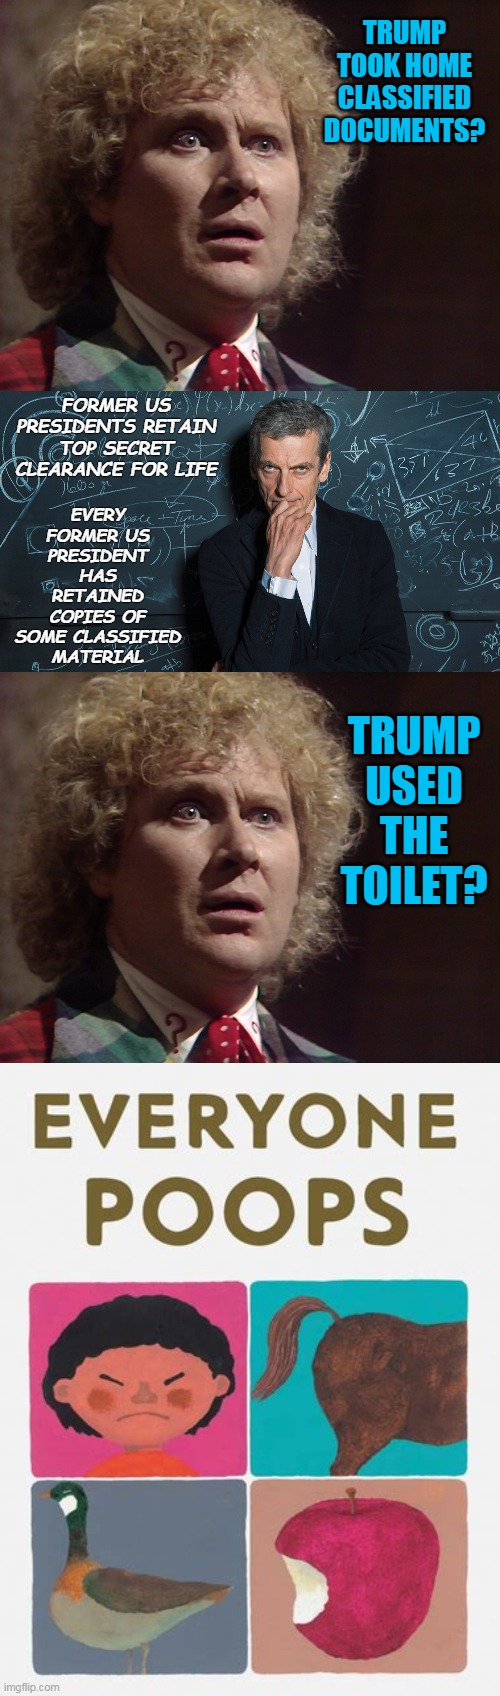 Yes, all 45 of them, every single one. | TRUMP TOOK HOME CLASSIFIED DOCUMENTS? FORMER US PRESIDENTS RETAIN TOP SECRET CLEARANCE FOR LIFE; EVERY FORMER US PRESIDENT HAS RETAINED COPIES OF SOME CLASSIFIED MATERIAL; TRUMP USED THE TOILET? | made w/ Imgflip meme maker